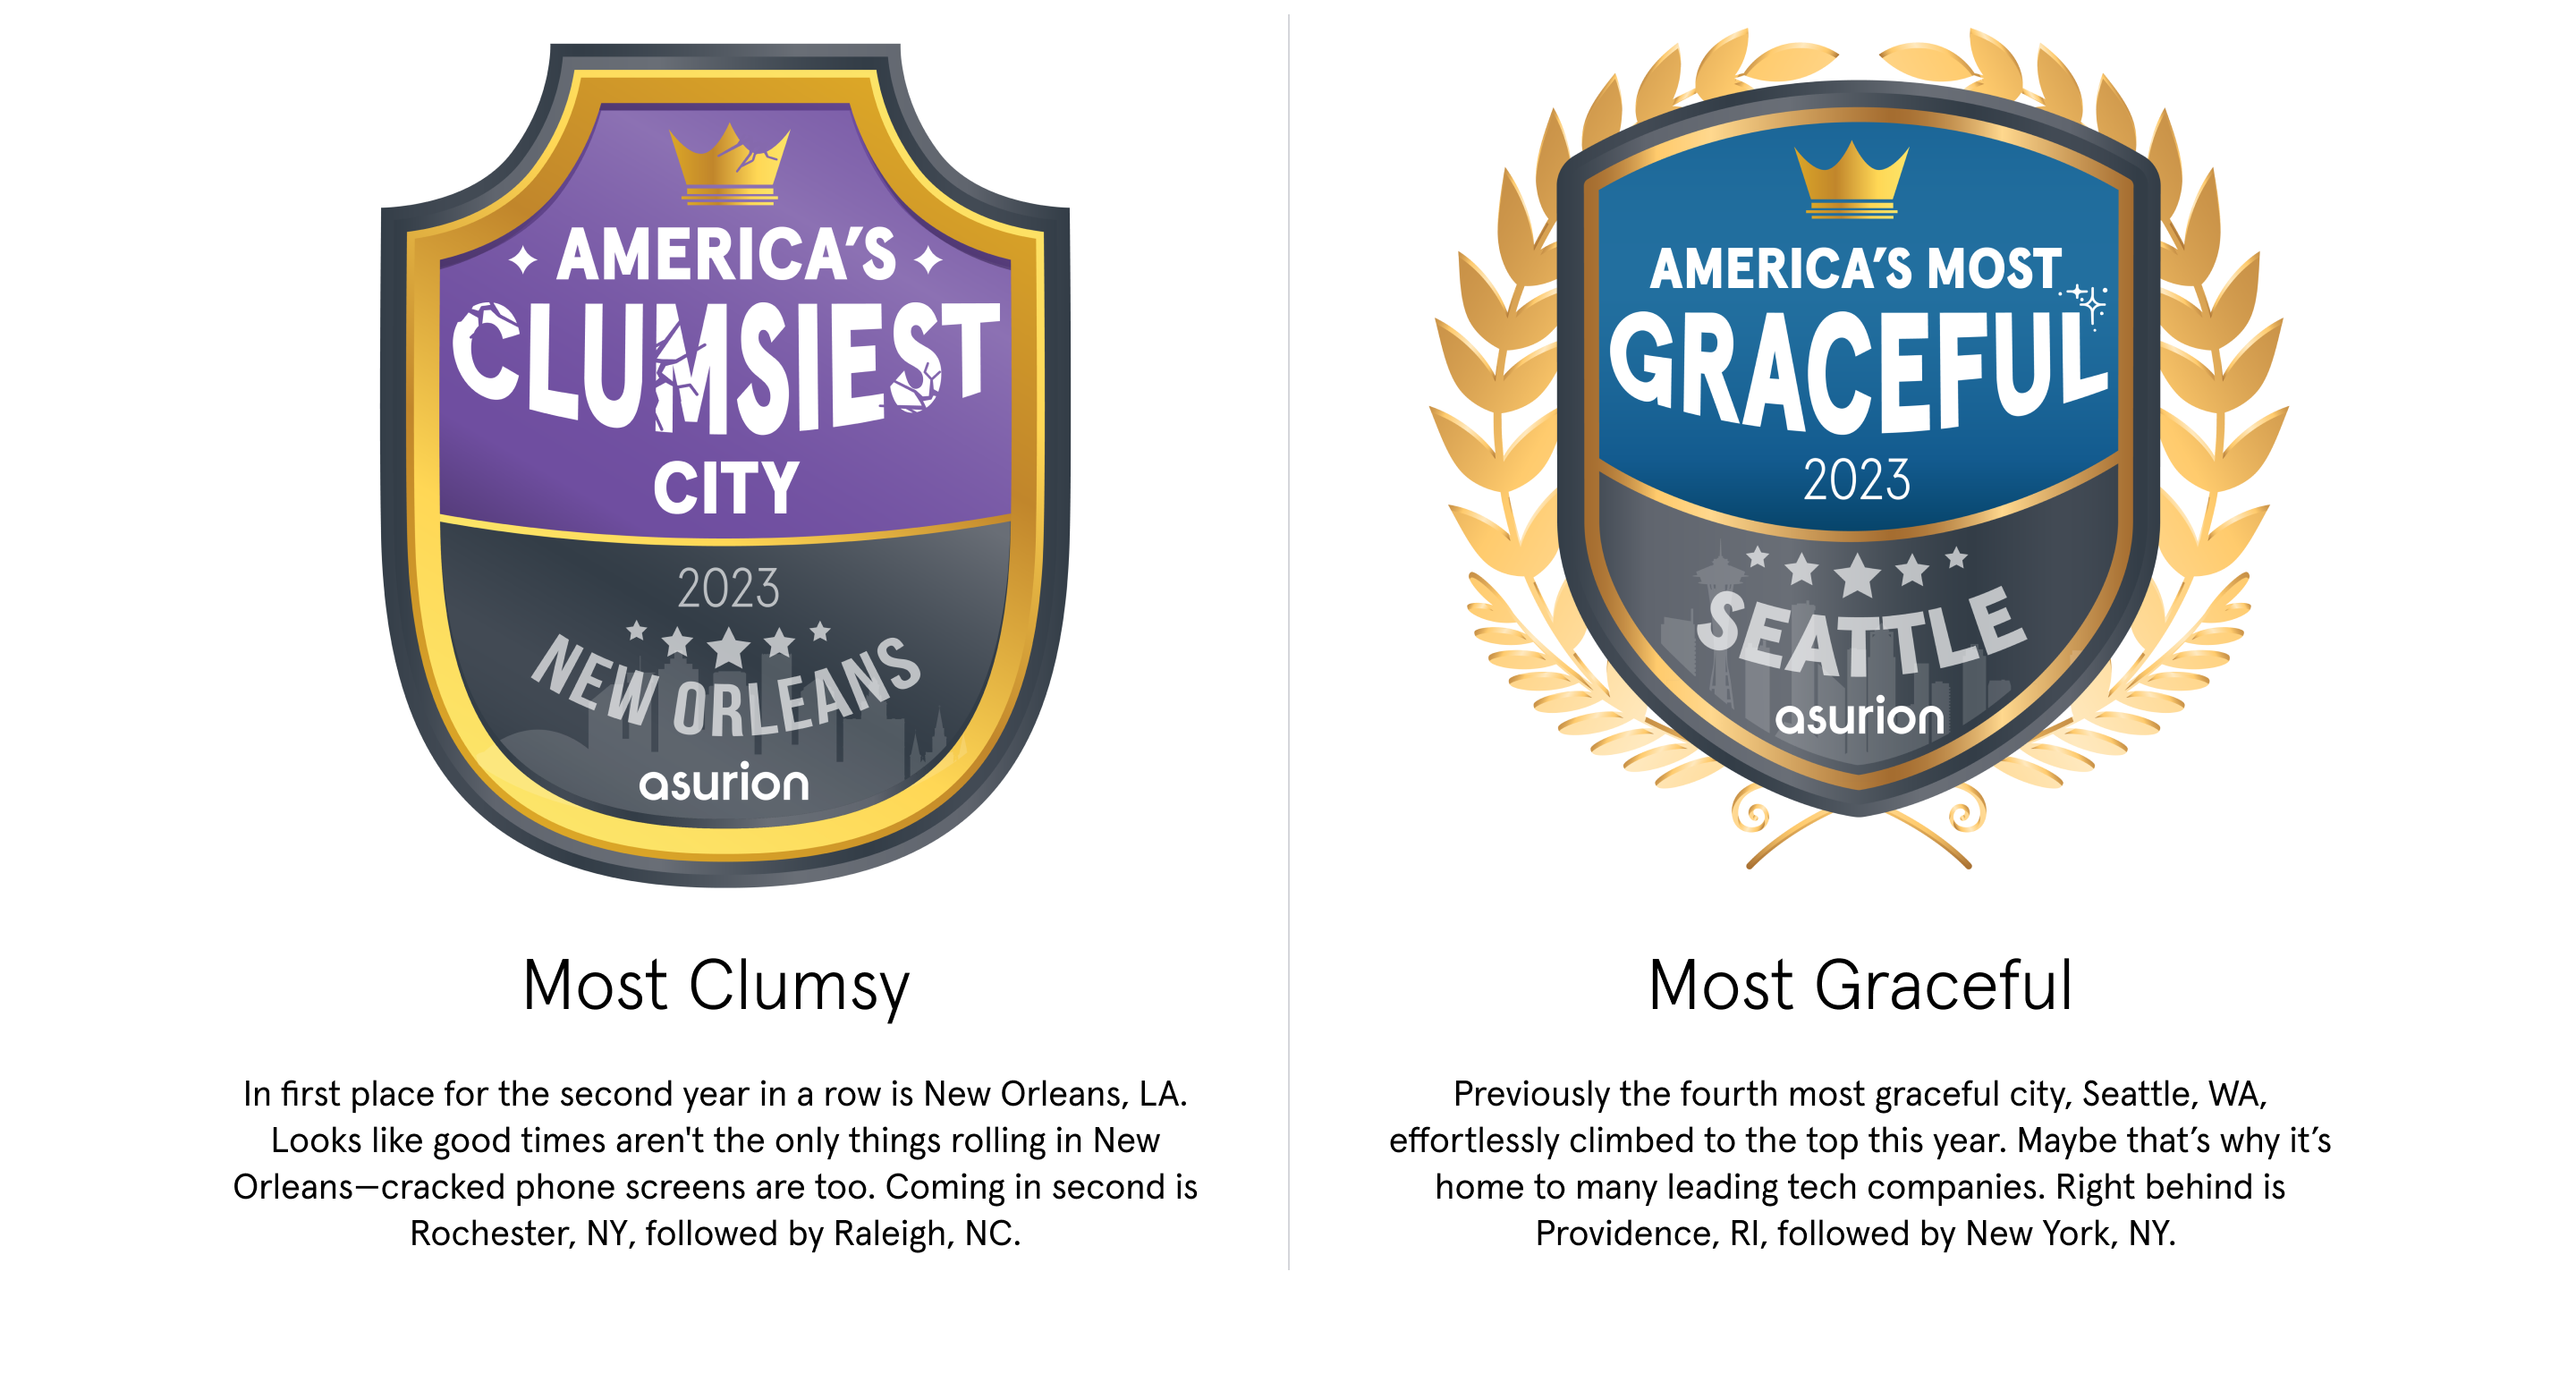 In first place for the second year for in a row for America's Clumsiest City is New Orleans, LA. Previously the fourth most graceful city, Seattle, WA, effortlessly climbed to the top this year. 